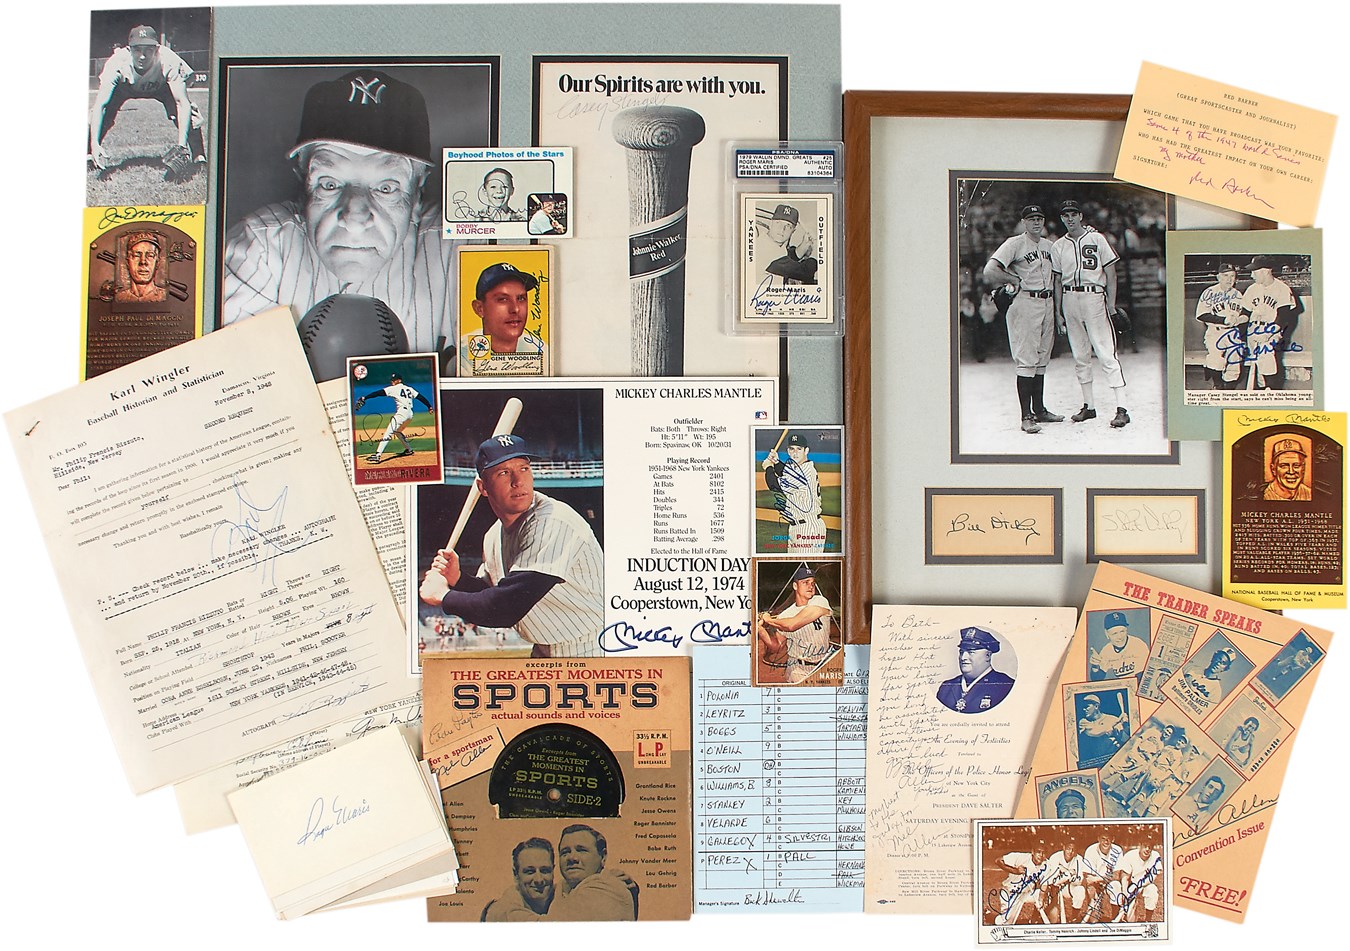 NY Yankees, Giants & Mets - Monumental New York Yankees Autograph & Photo Collection - with 7 Roger Maris Signatures (350+)